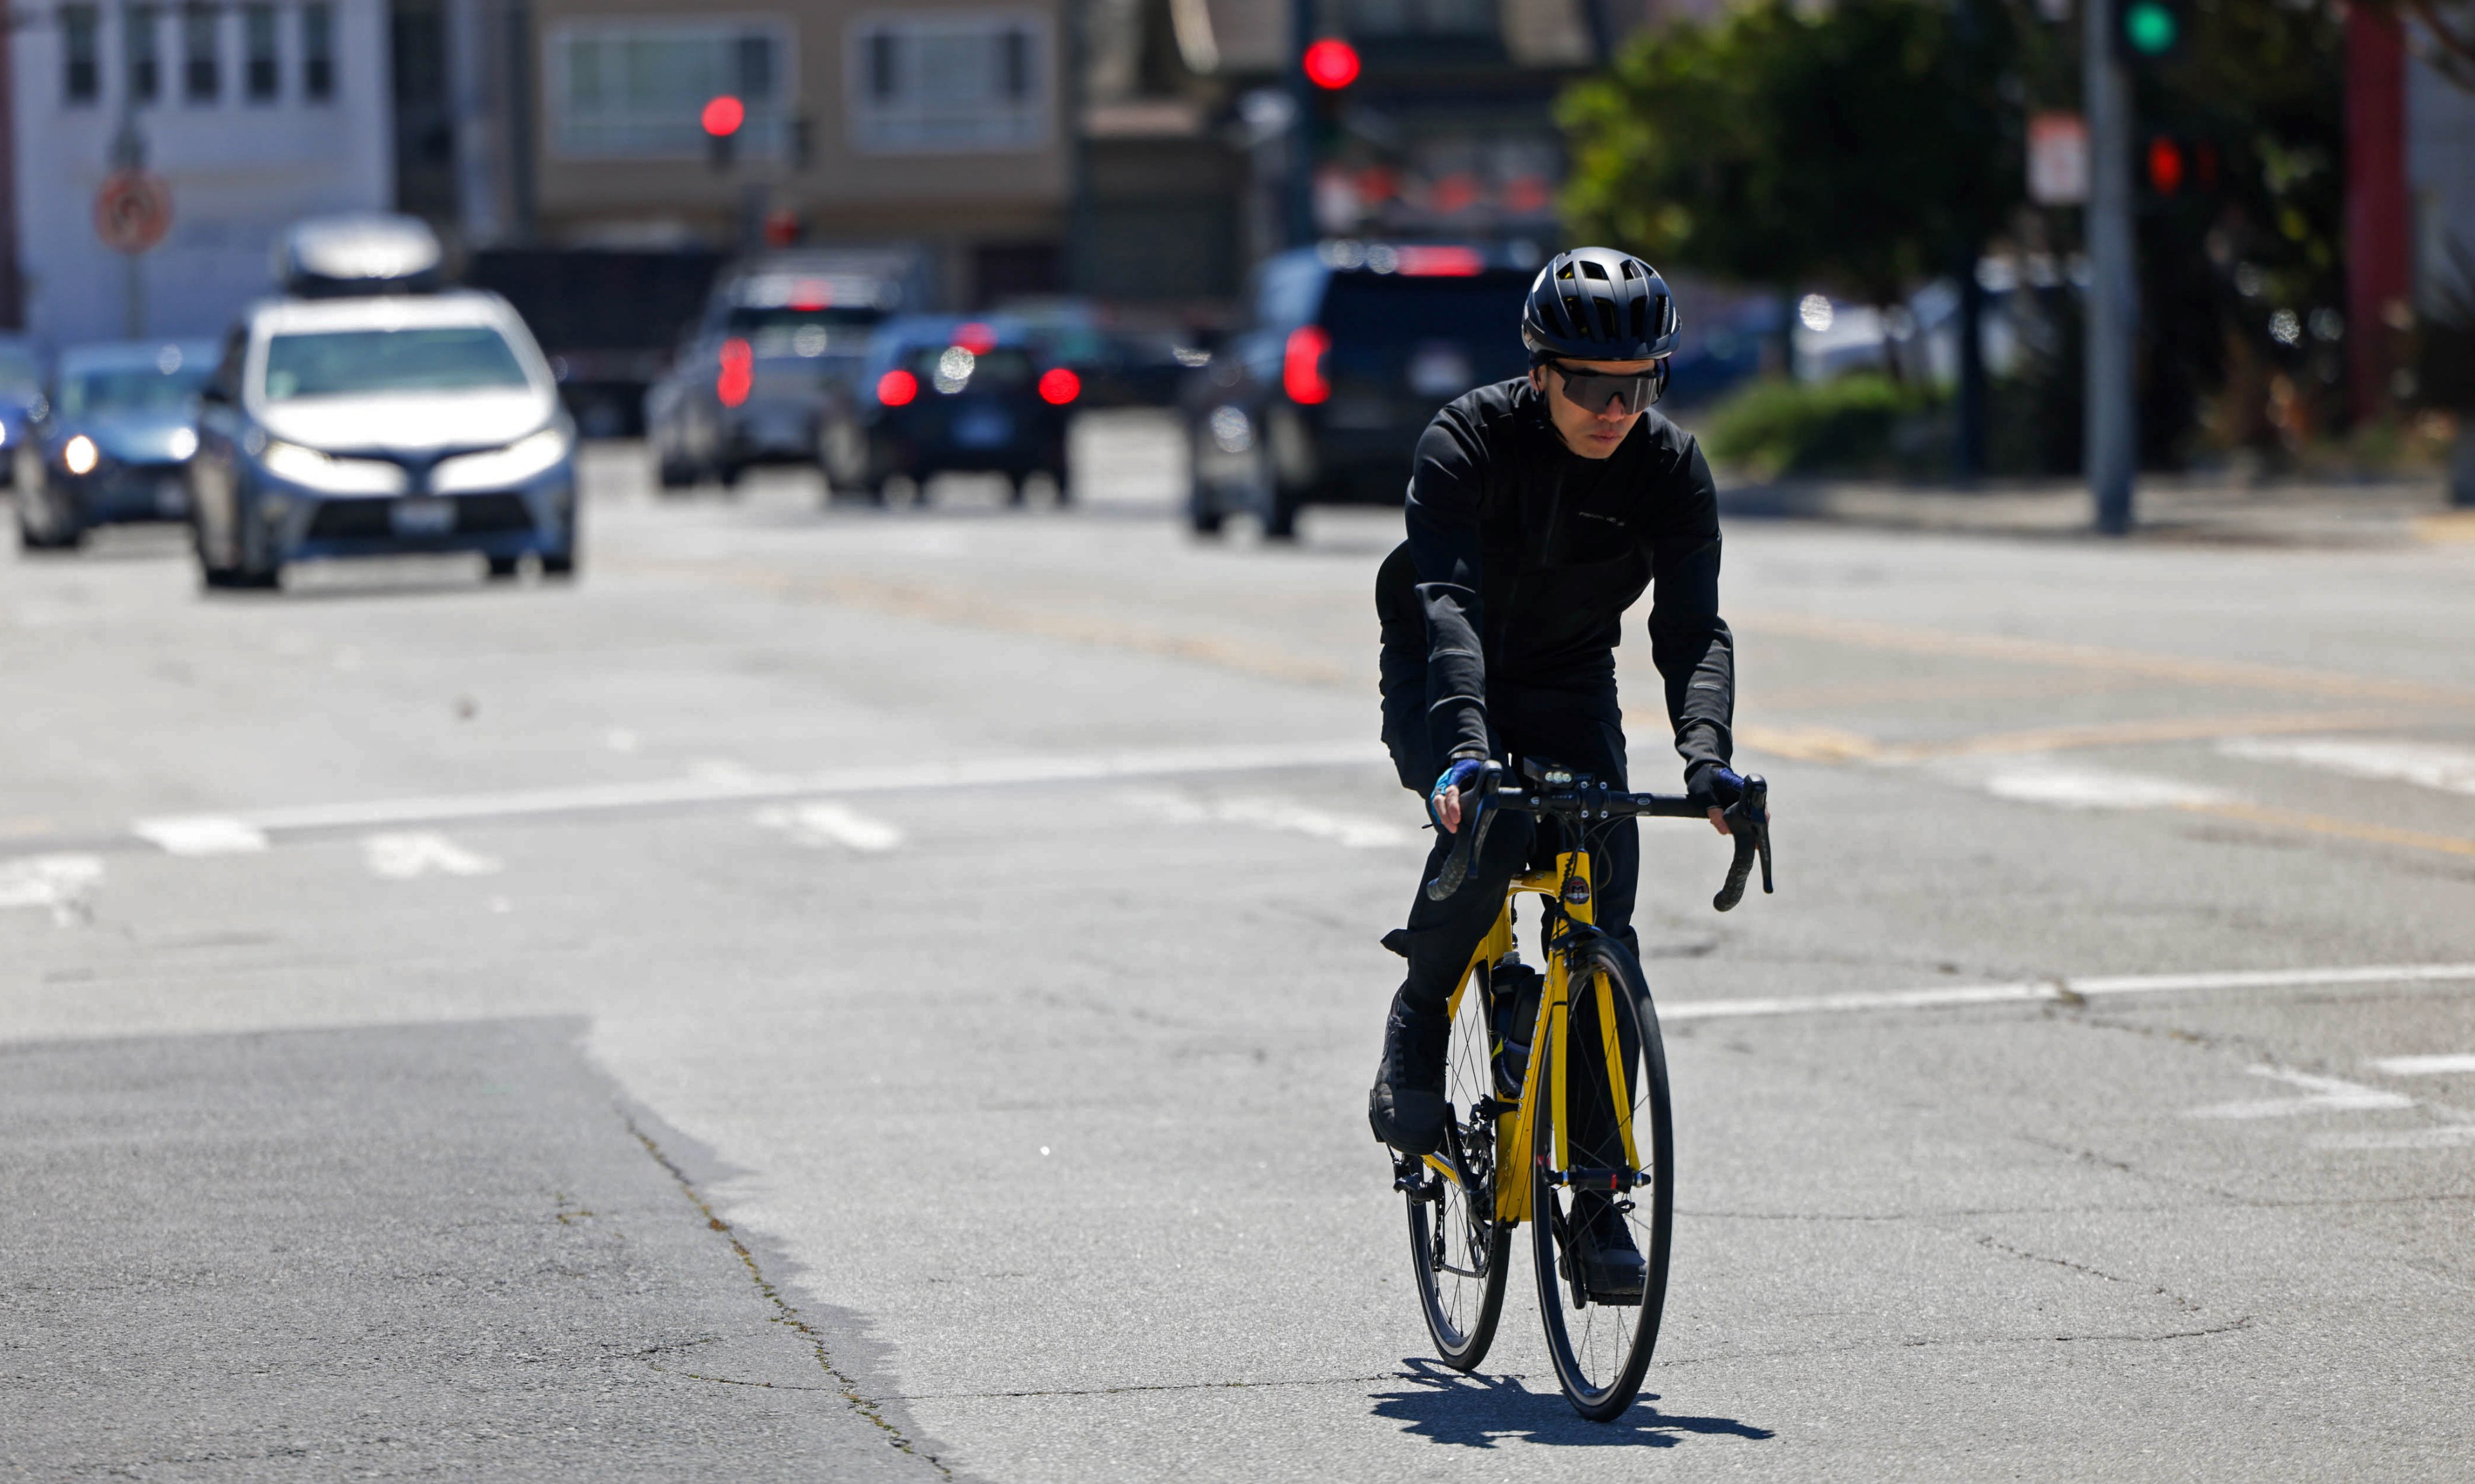 A cyclist in black attire and helmet rides a yellow bike on a sunny city street with cars and traffic lights.